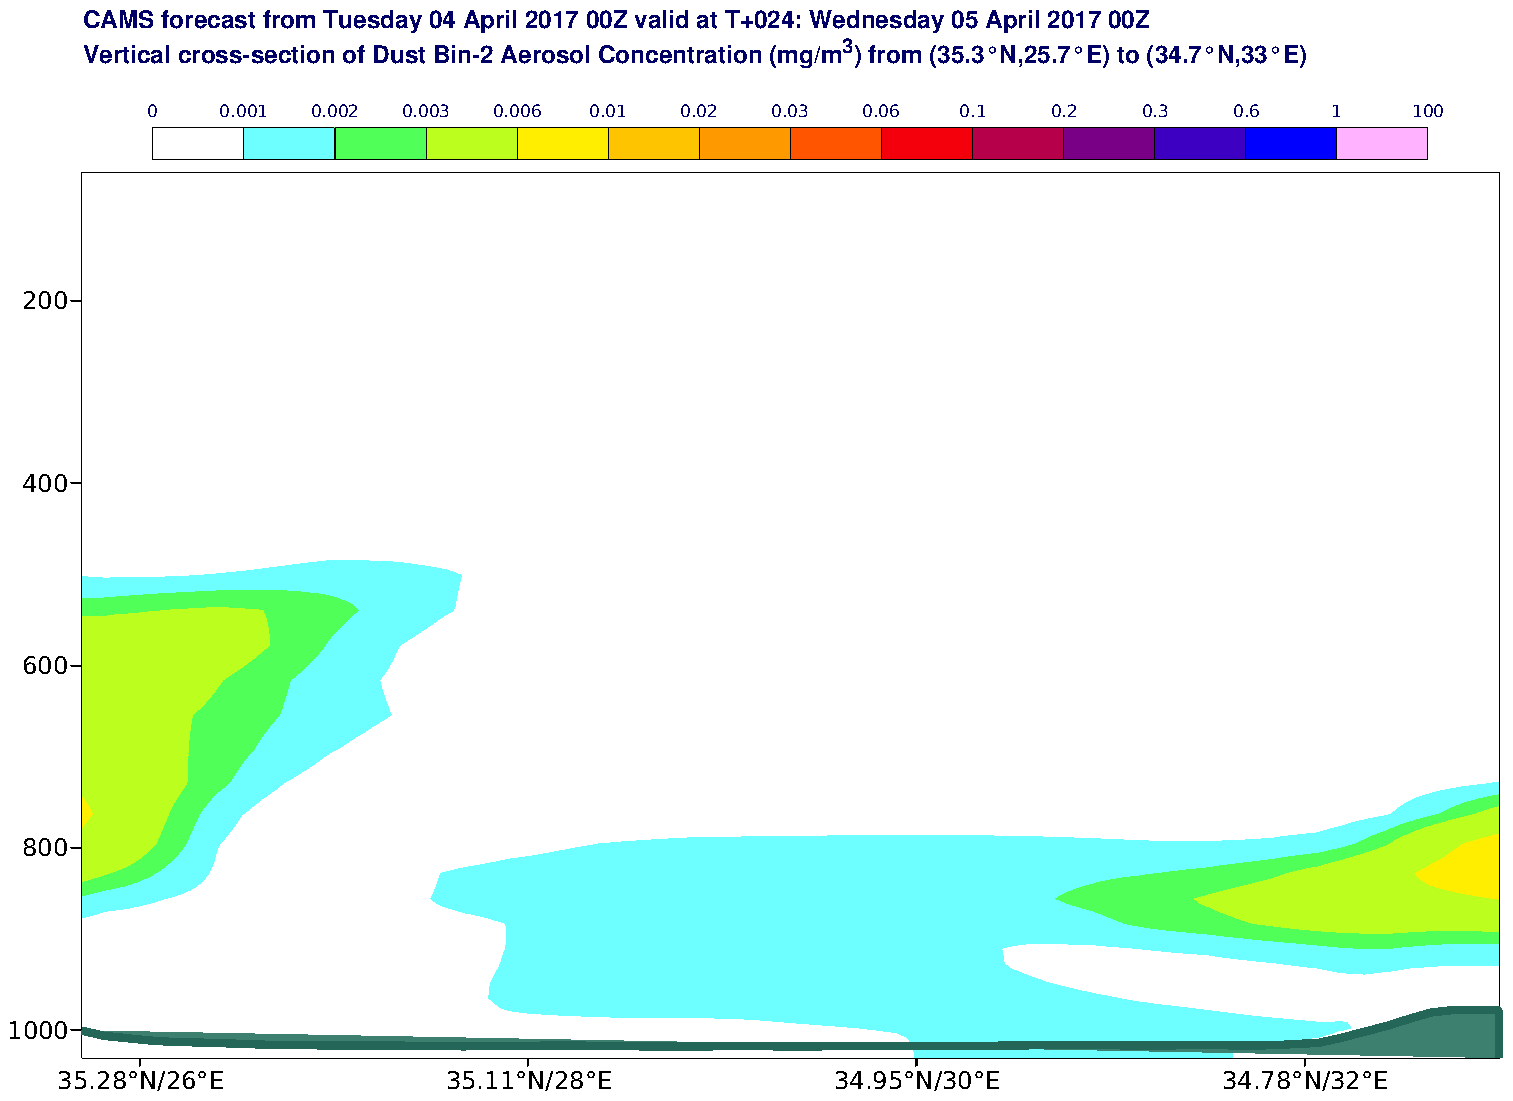 Vertical cross-section of Dust Bin-2 Aerosol Concentration (mg/m3) valid at T24 - 2017-04-05 00:00